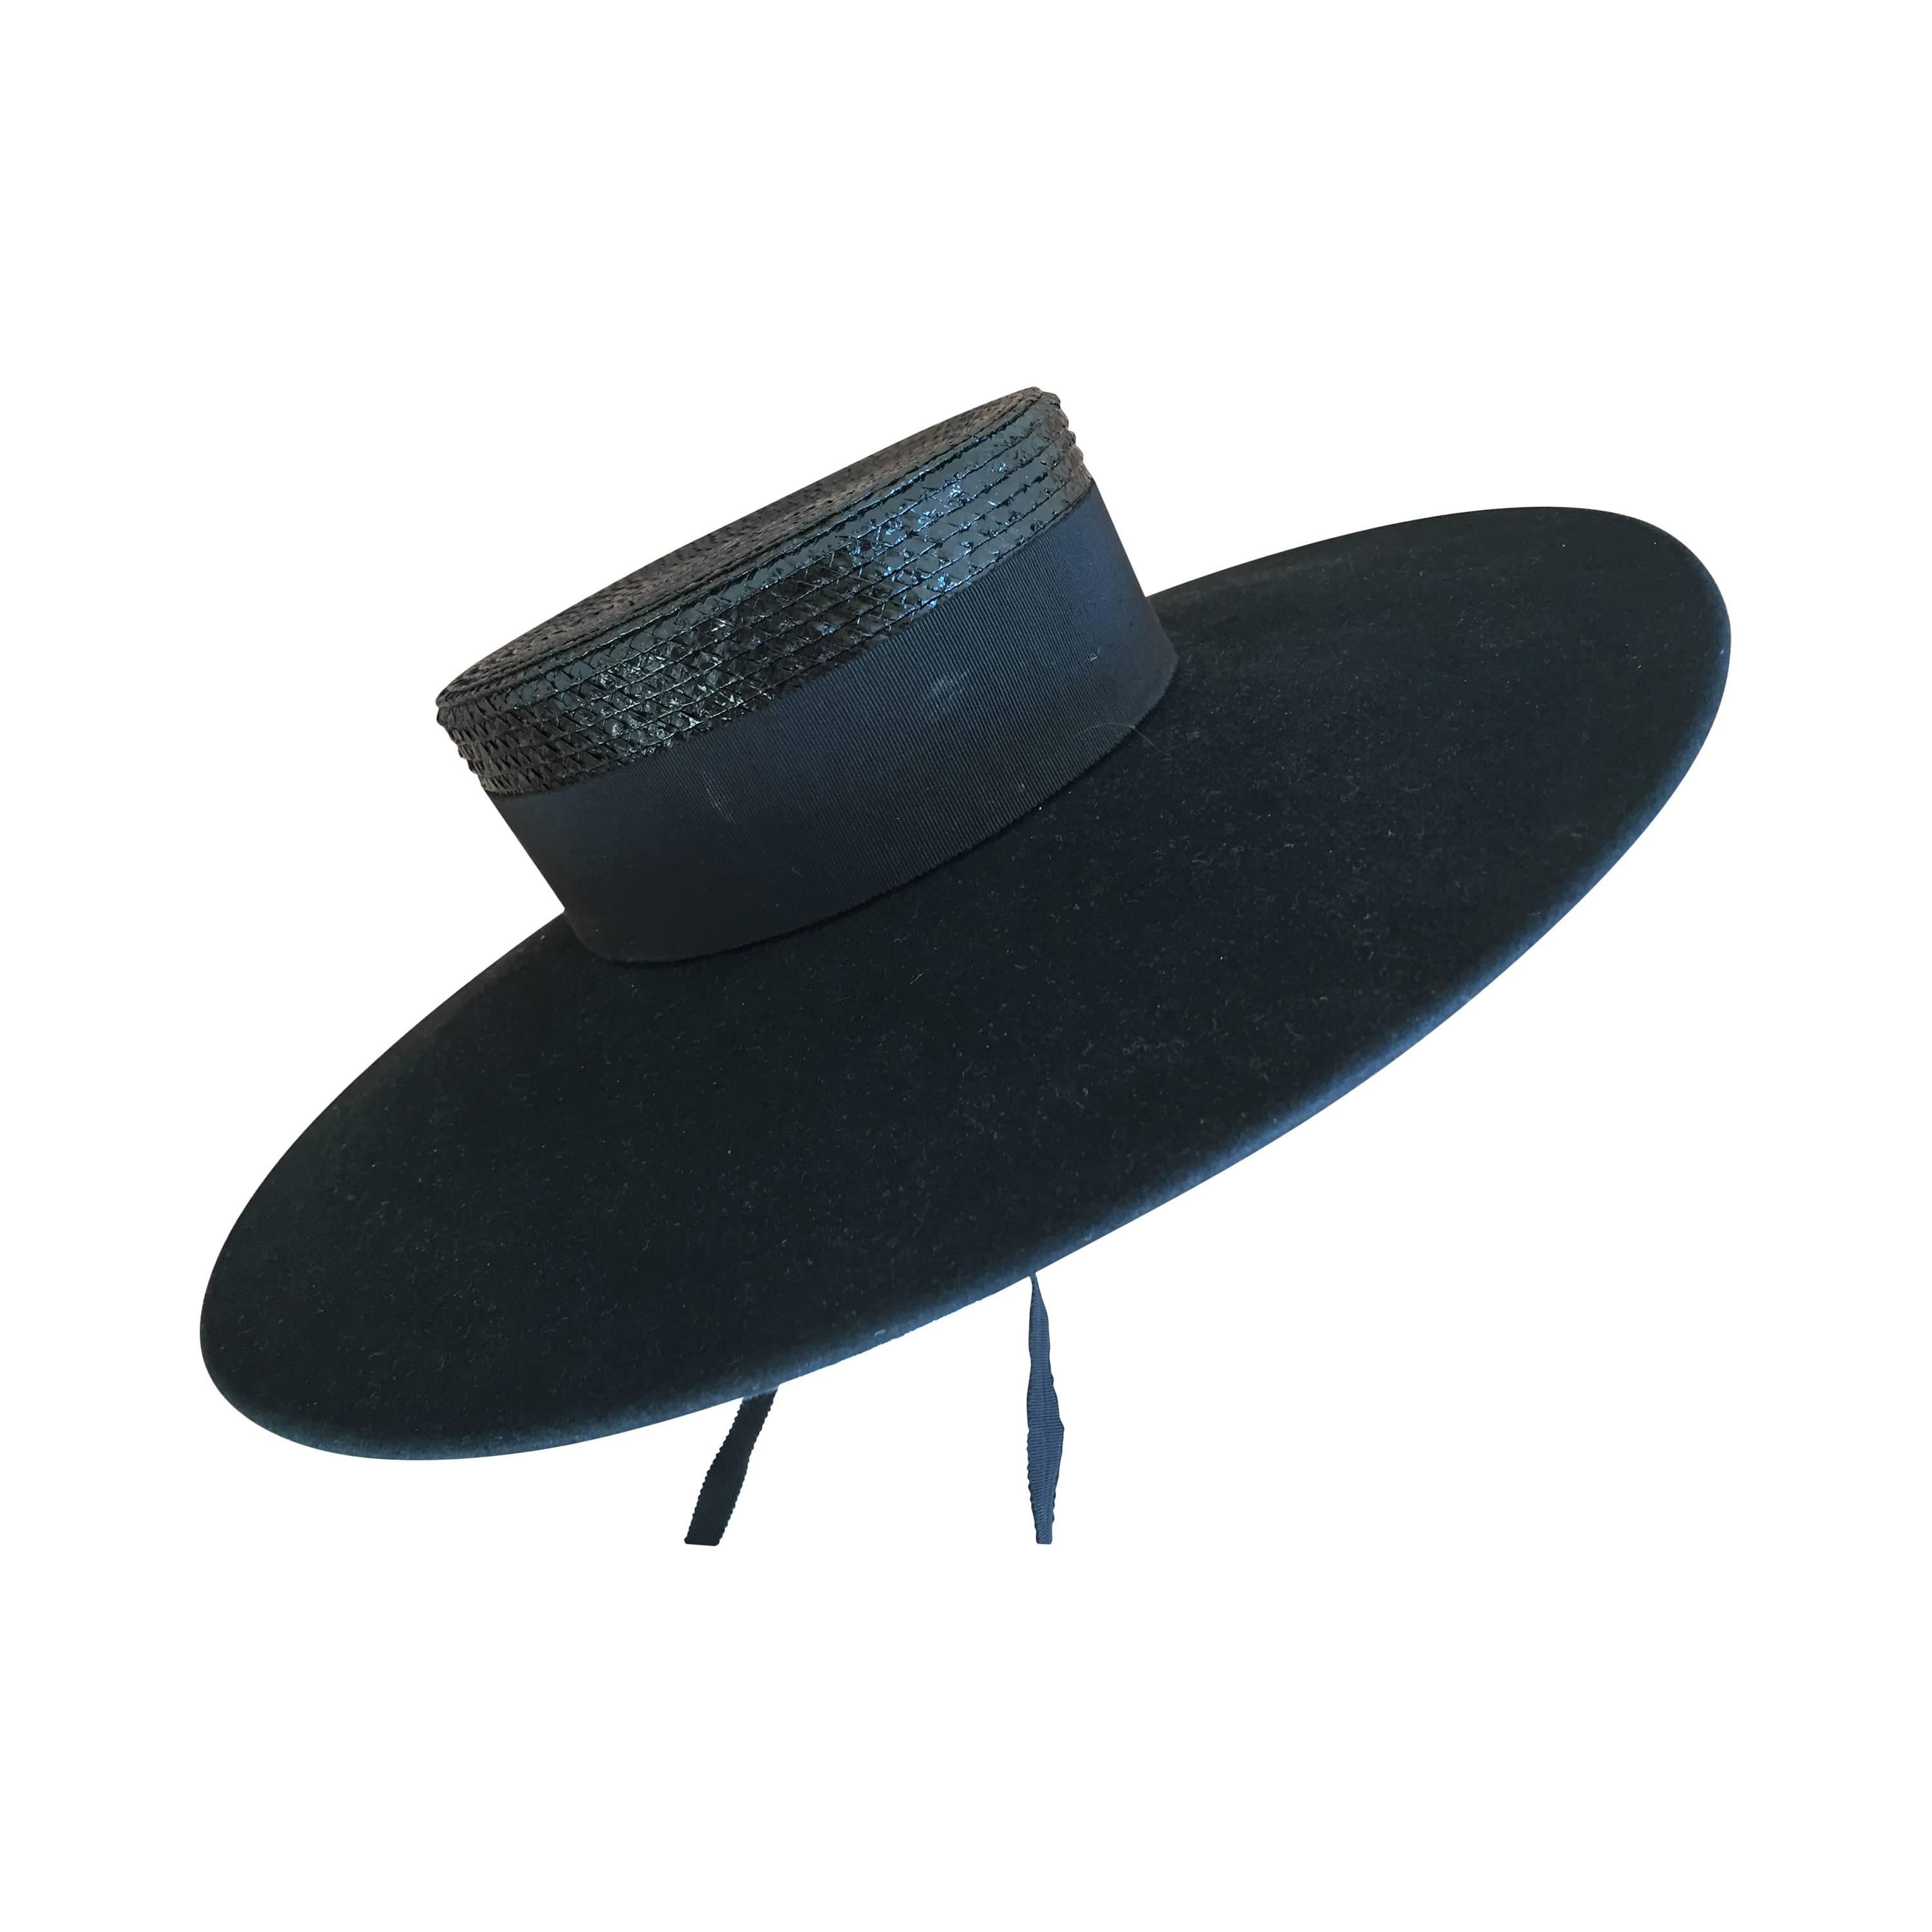 Yves Saint Laurent Numbered Couture Runway Black Hat